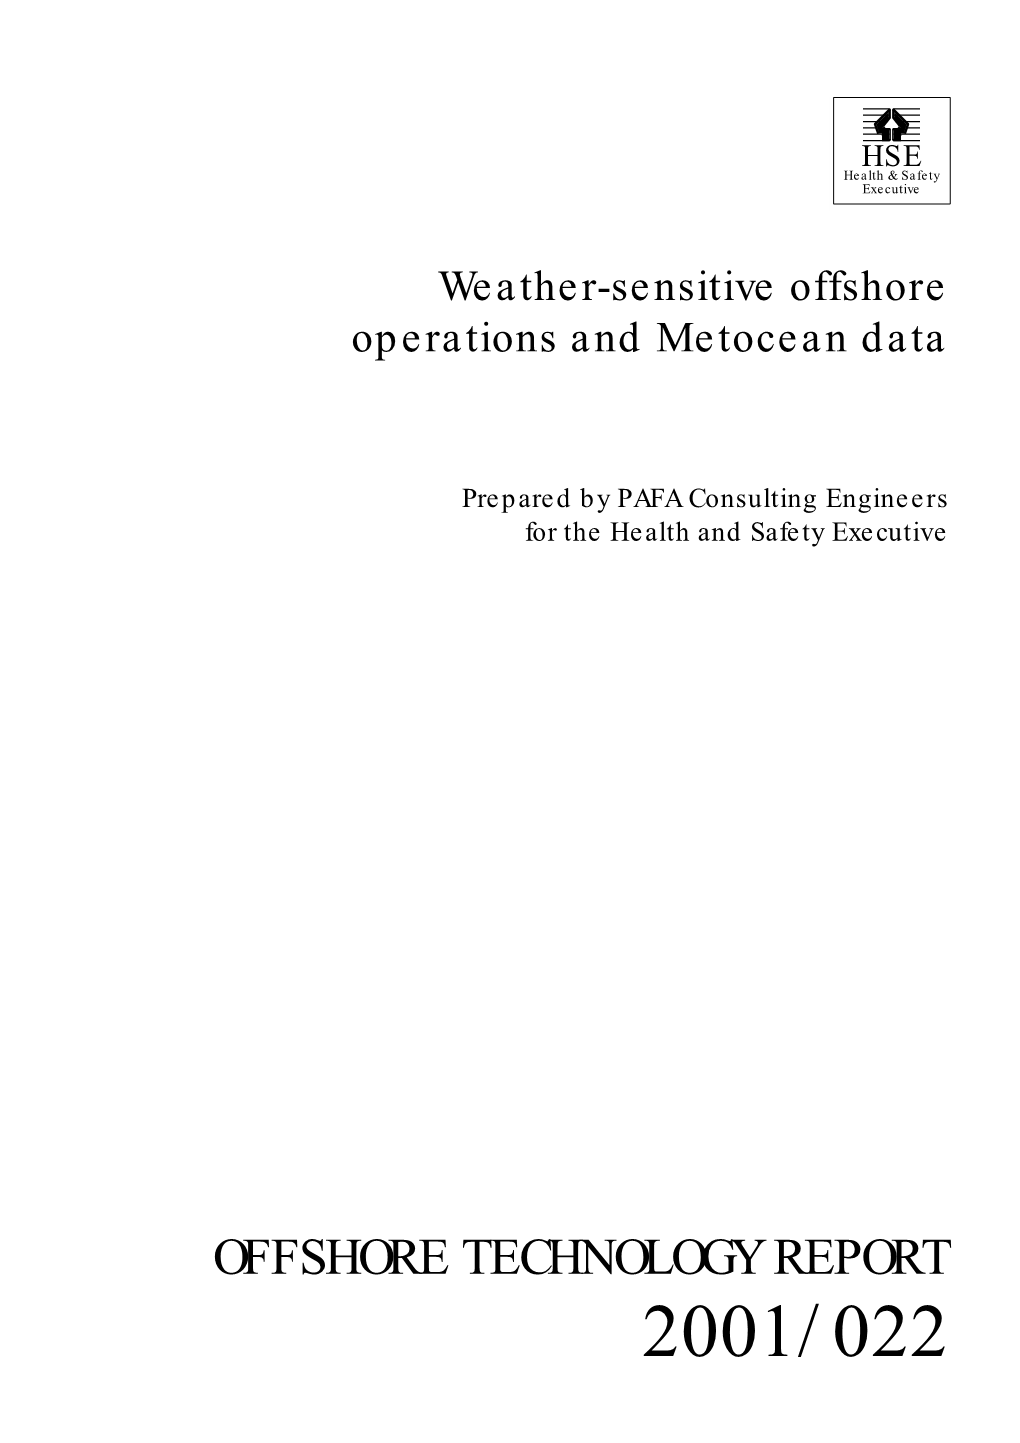 Weather-Sensitive Offshore Operations and Metocean Data